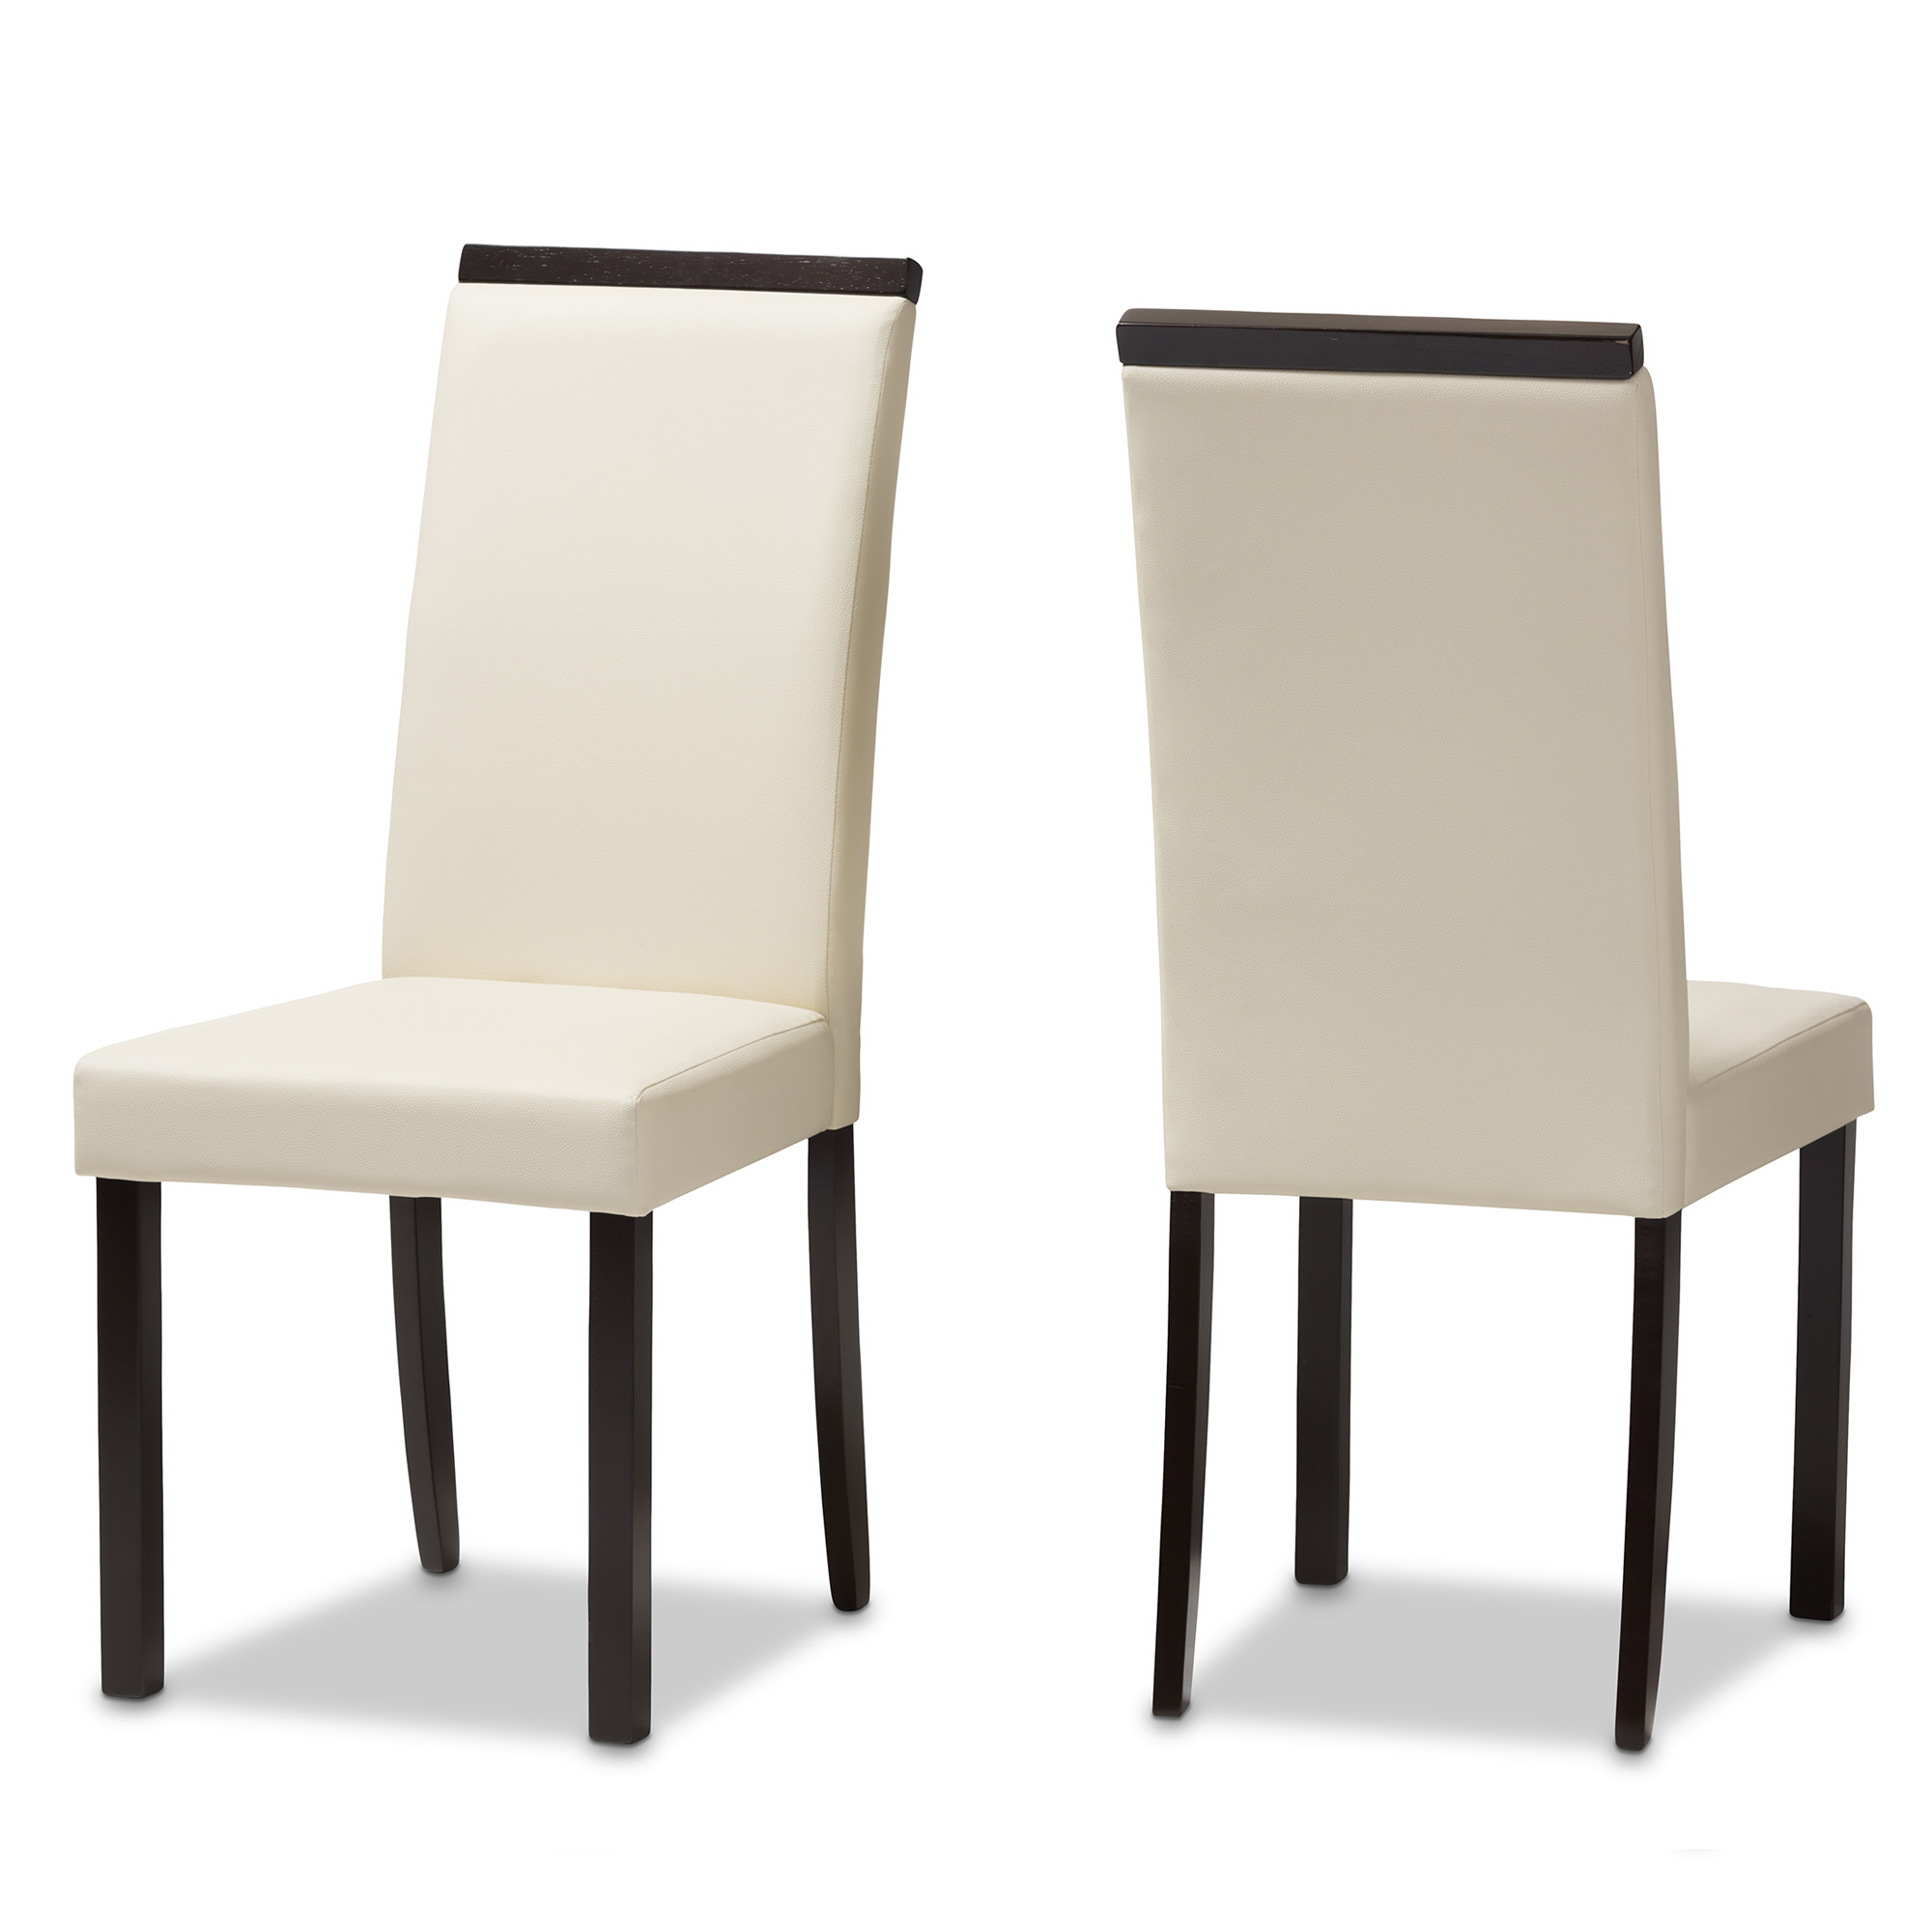 Baxton Studio Daveney Modern and Contemporary Cream Faux Leather Upholstered Dining Chair Set of 2